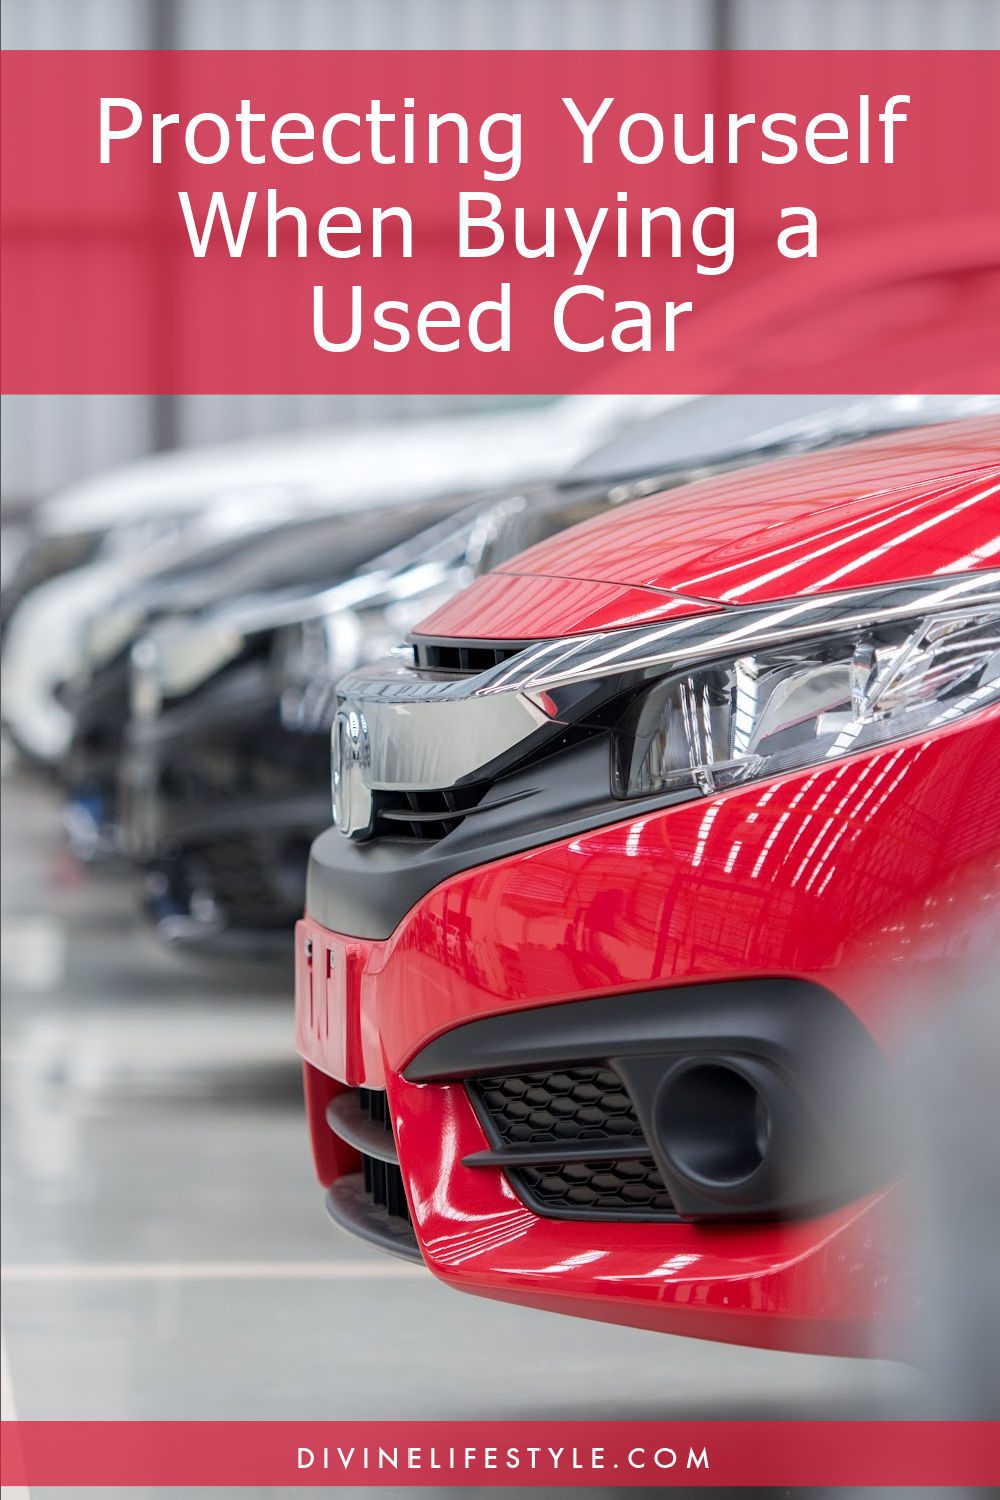 Protecting Yourself When Buying a Used Car